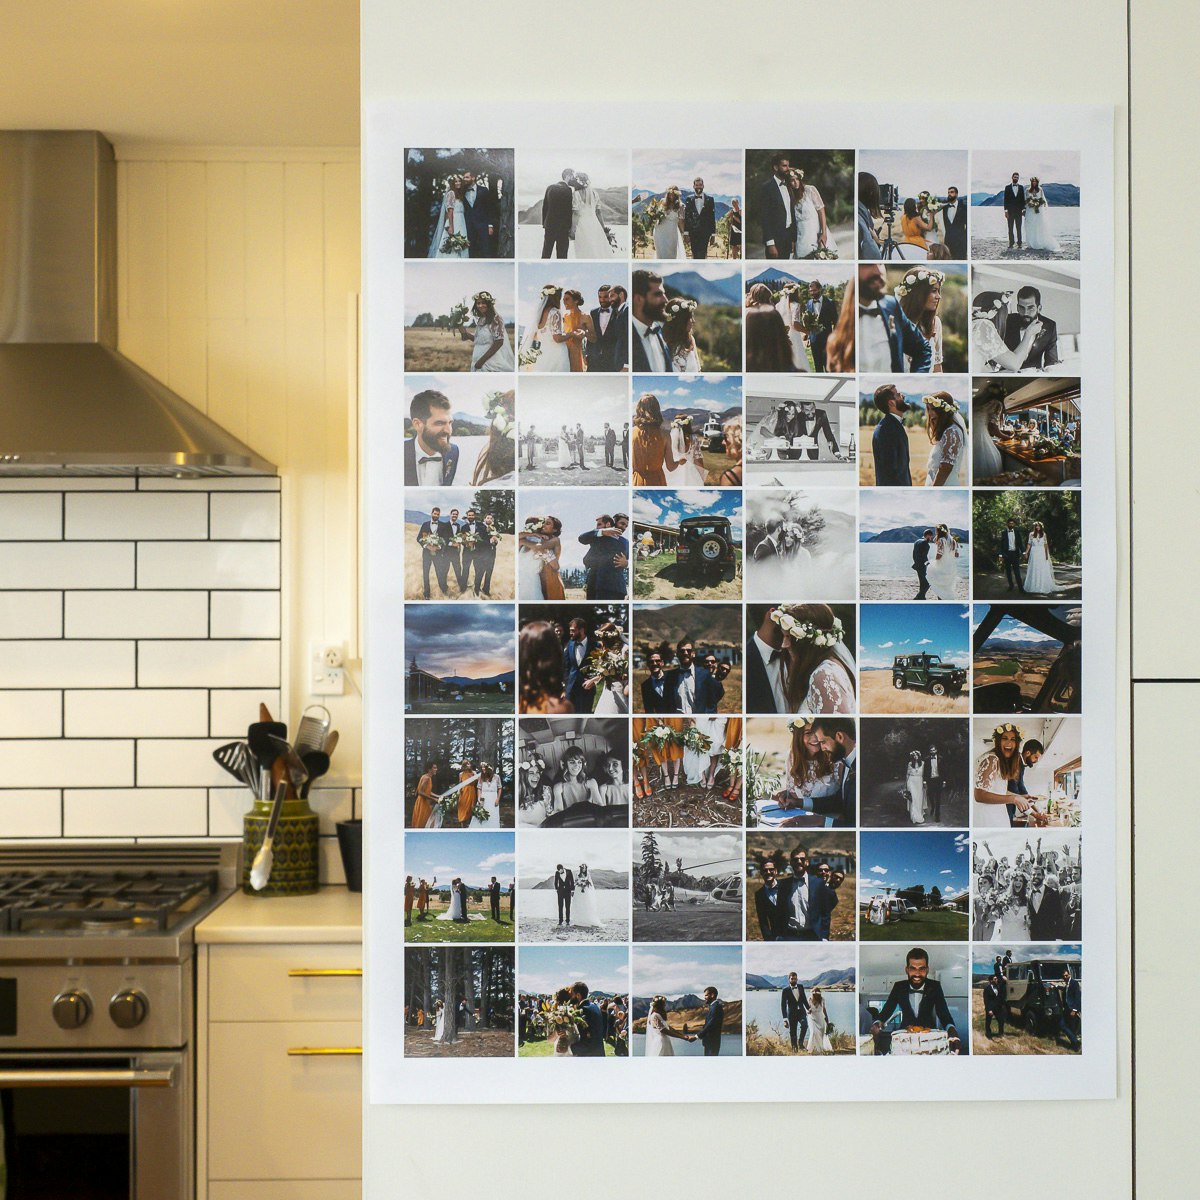 Photo Collage Poster Template